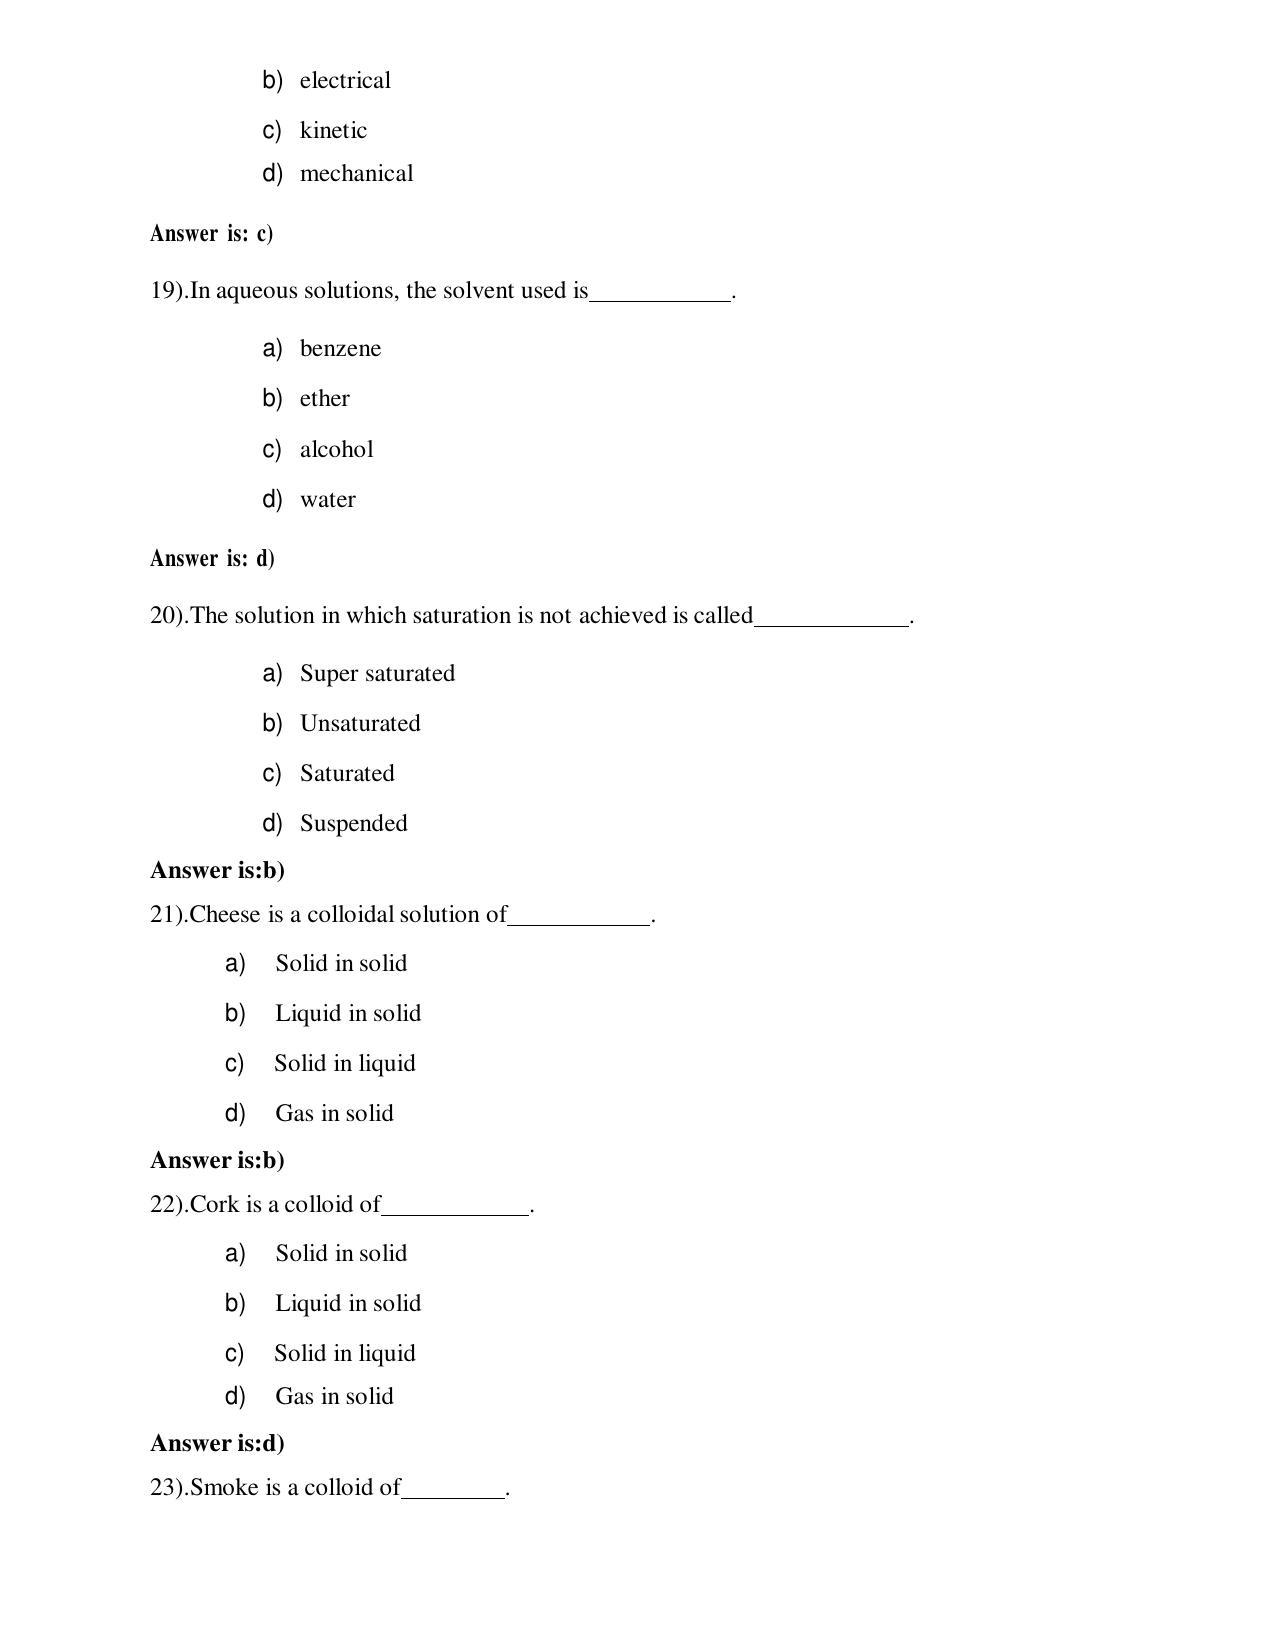 OUAT Chemistry Sample Paper - Page 5